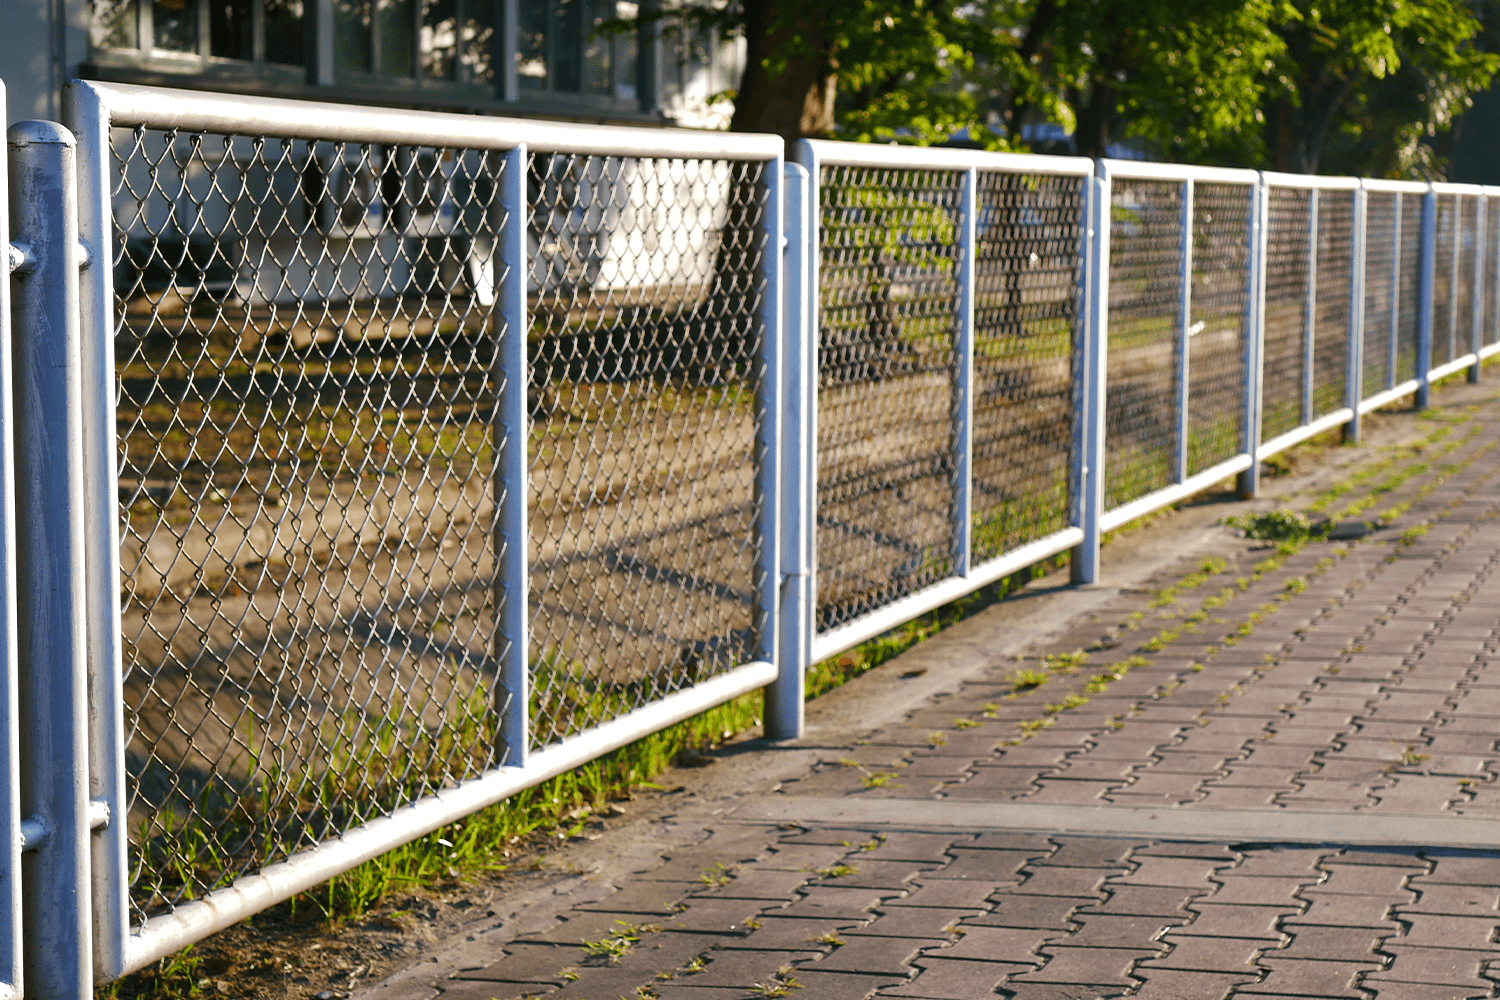 7 Inexpensive Ways to Cover a Chain Link Fence